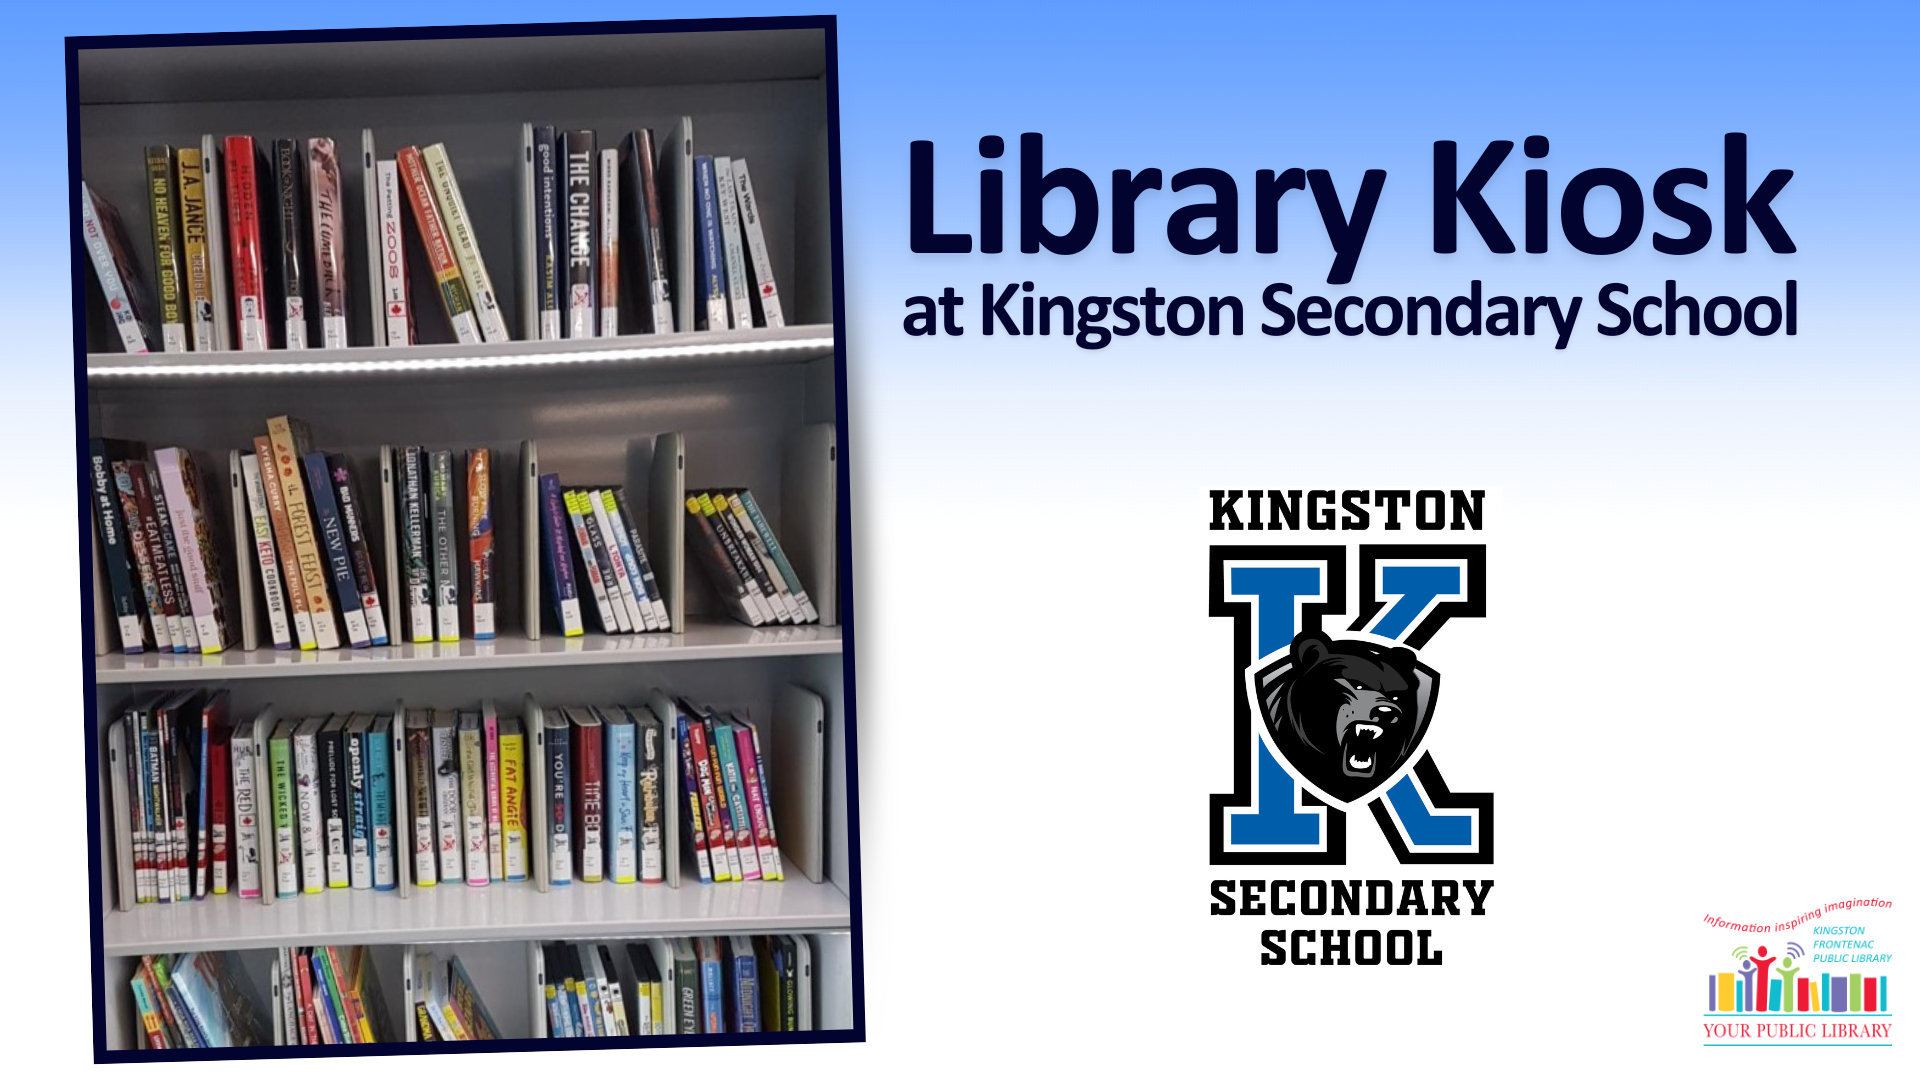 The library kiosk at KSS with text reading Library Kiosk at Kingston Secondary School